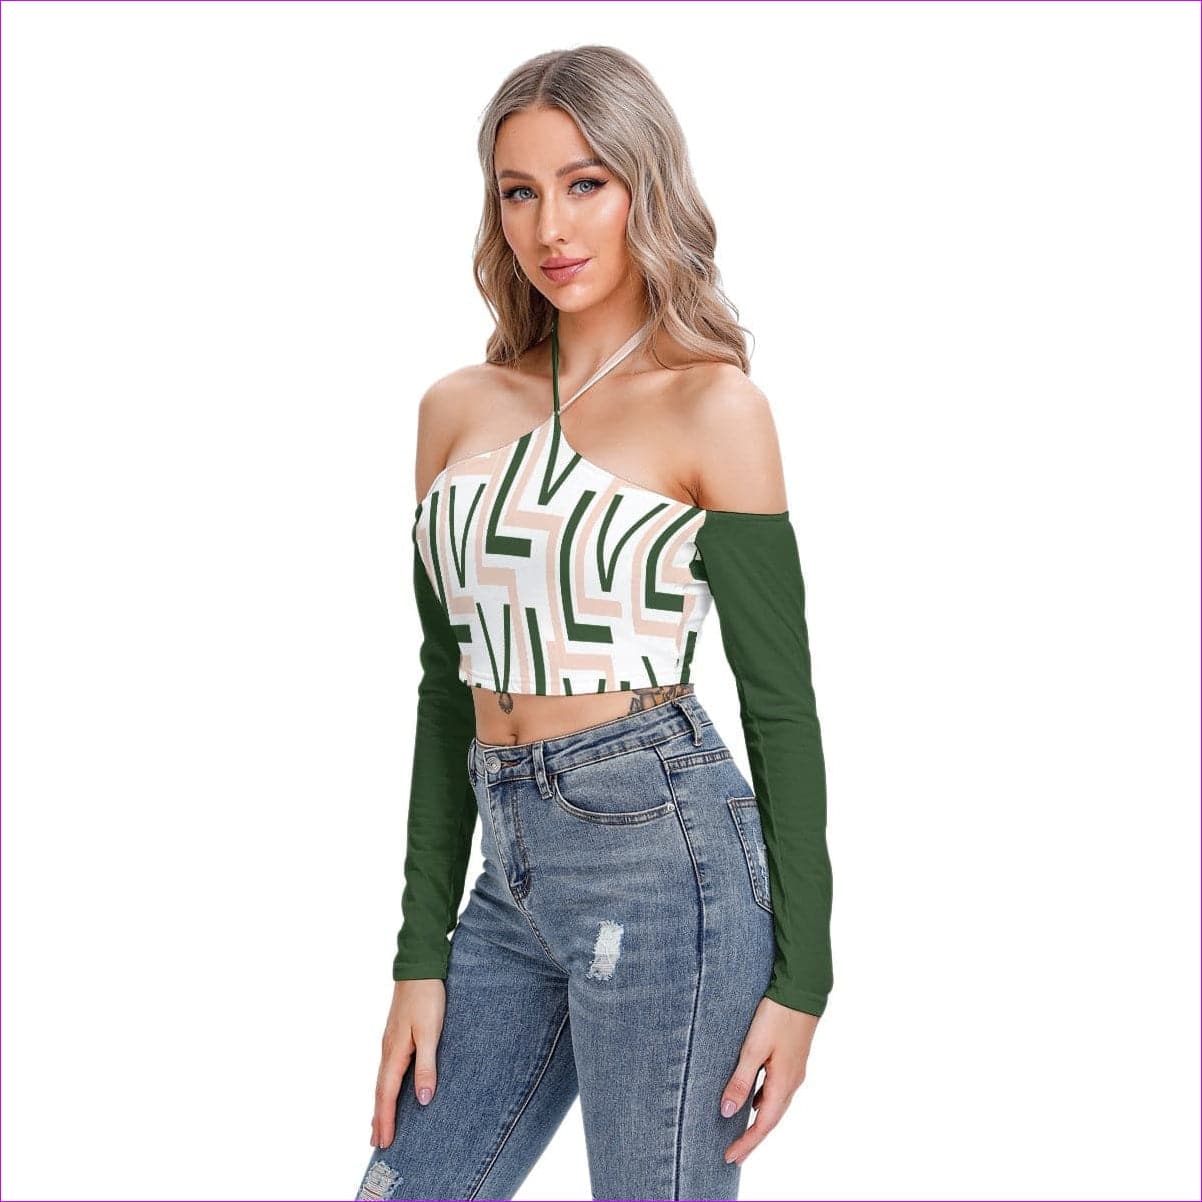 Labyrinth 2 Womens Halter Lace-up Top - women's crop top at TFC&H Co.